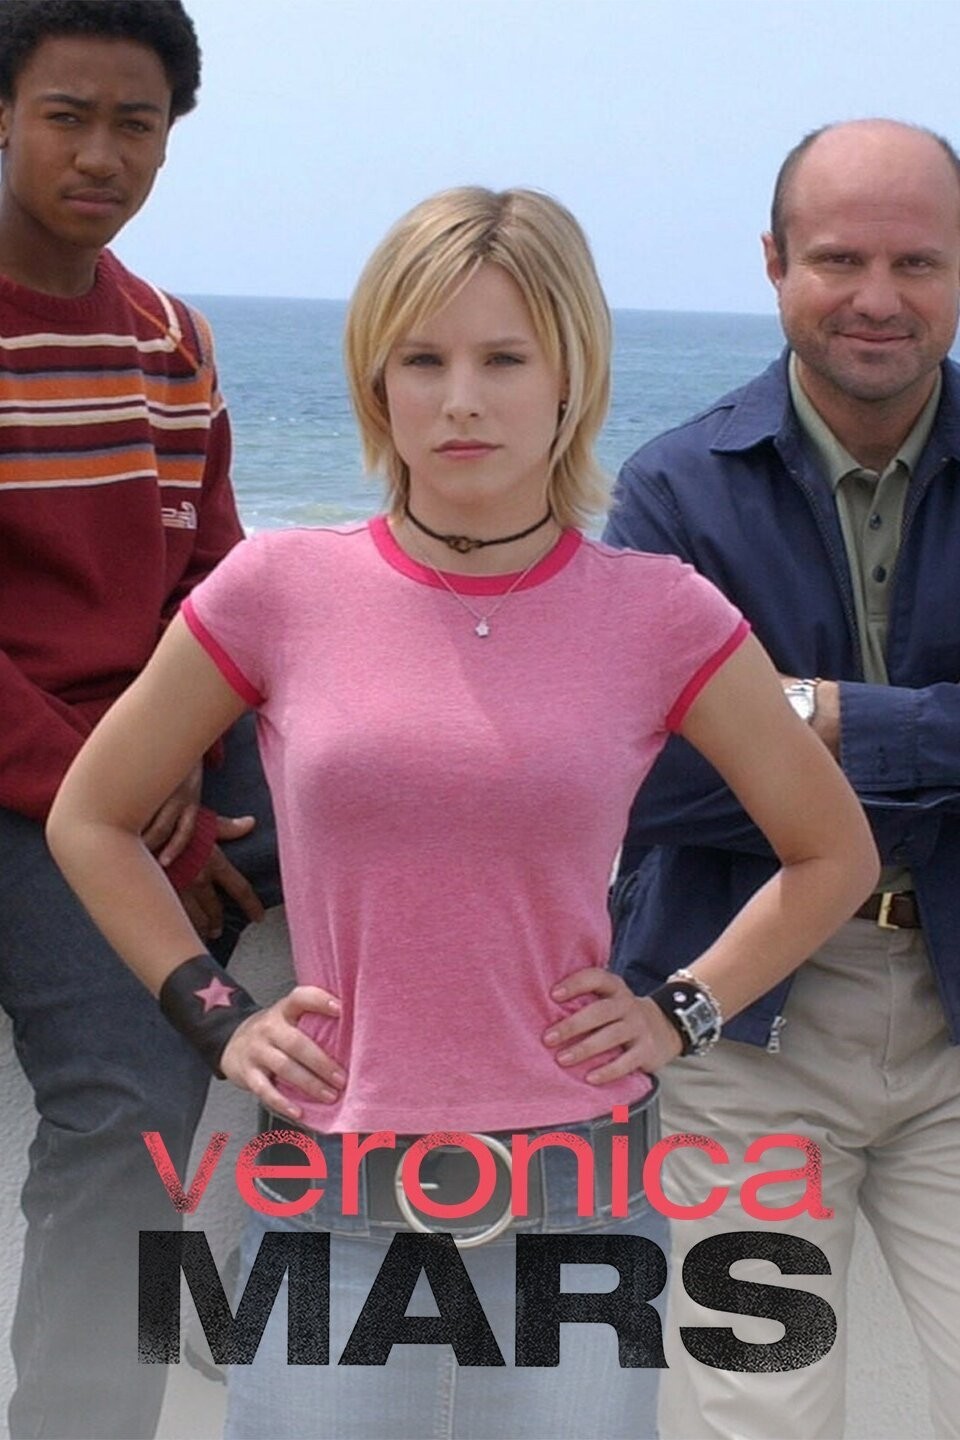 Kristen bell veronica mars 2005 hi-res stock photography and